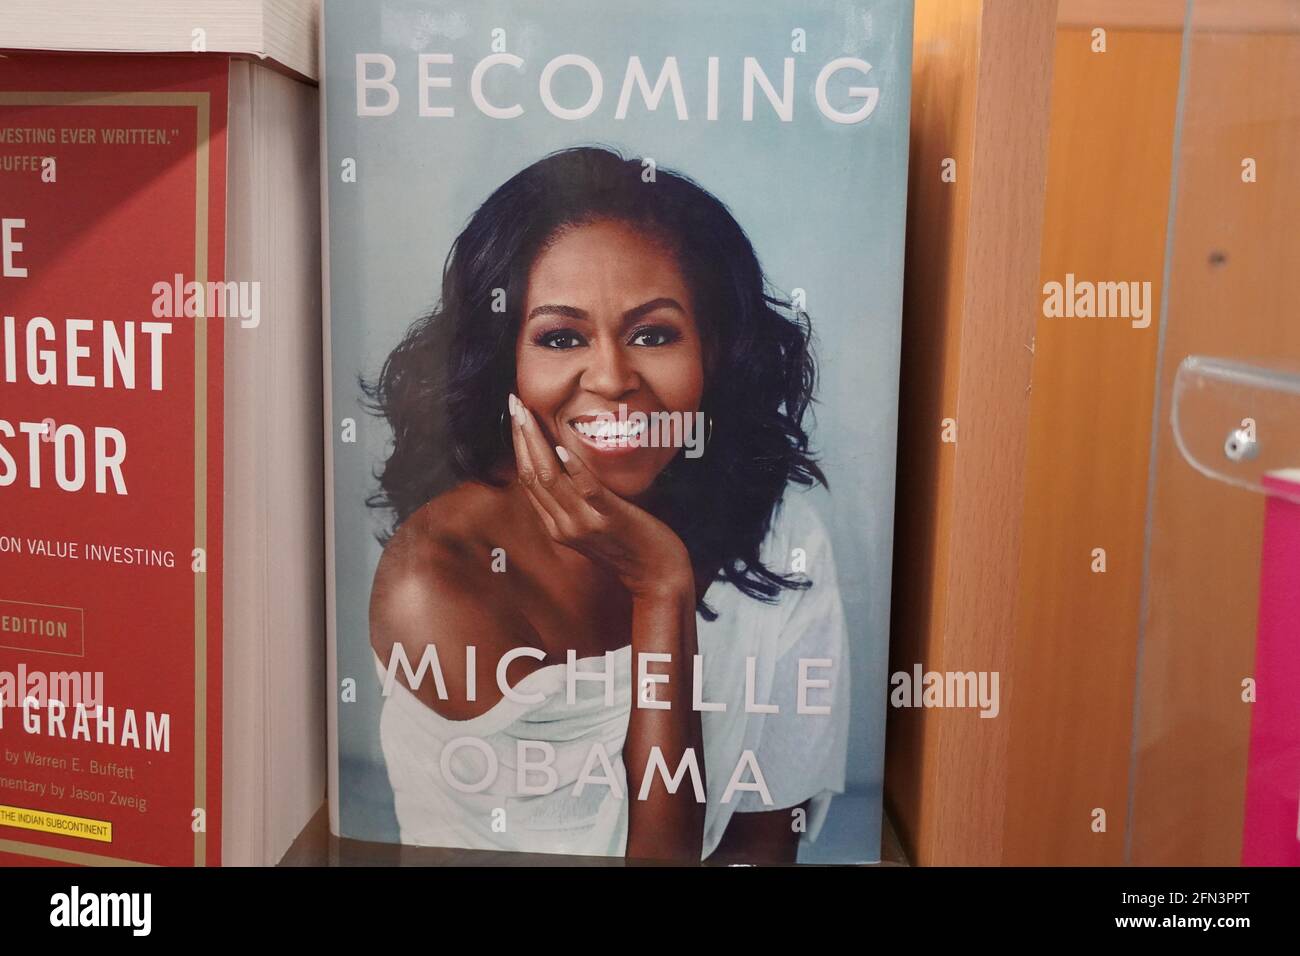 Becoming book written by Michelle Obama at the bookstore. books by Michelle Obama displayed on the shelves of a book shop. Library - Kochi, India: Jan Stock Photo